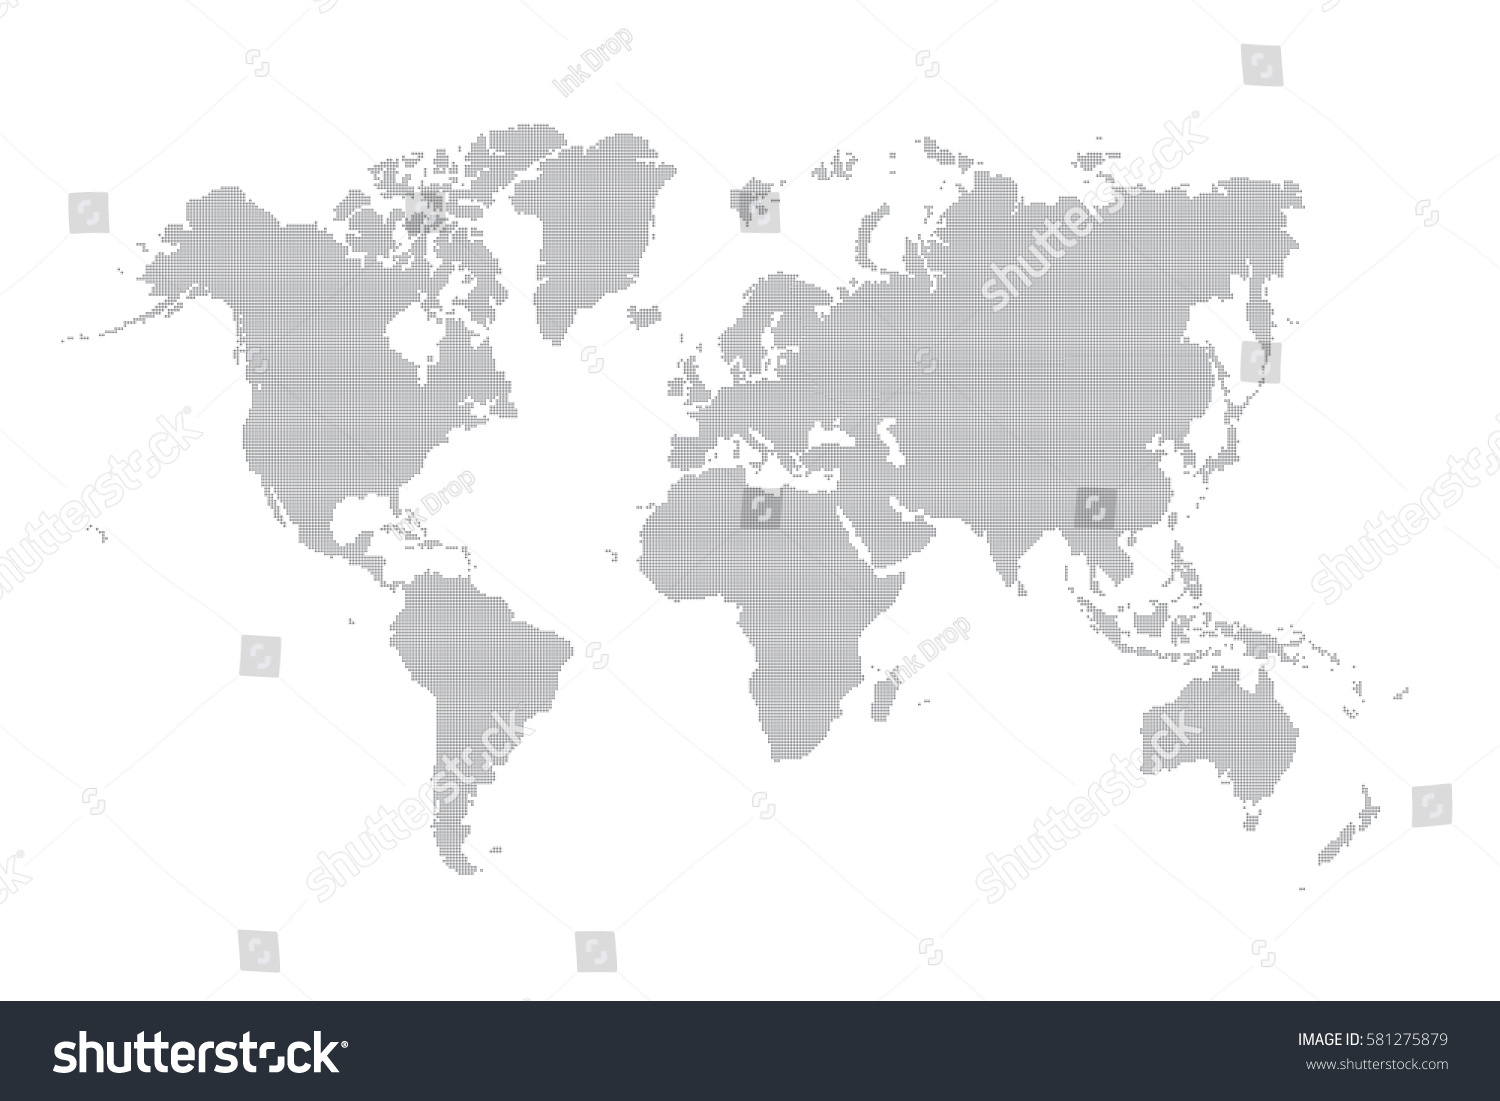 World map made with a dot pattern #581275879